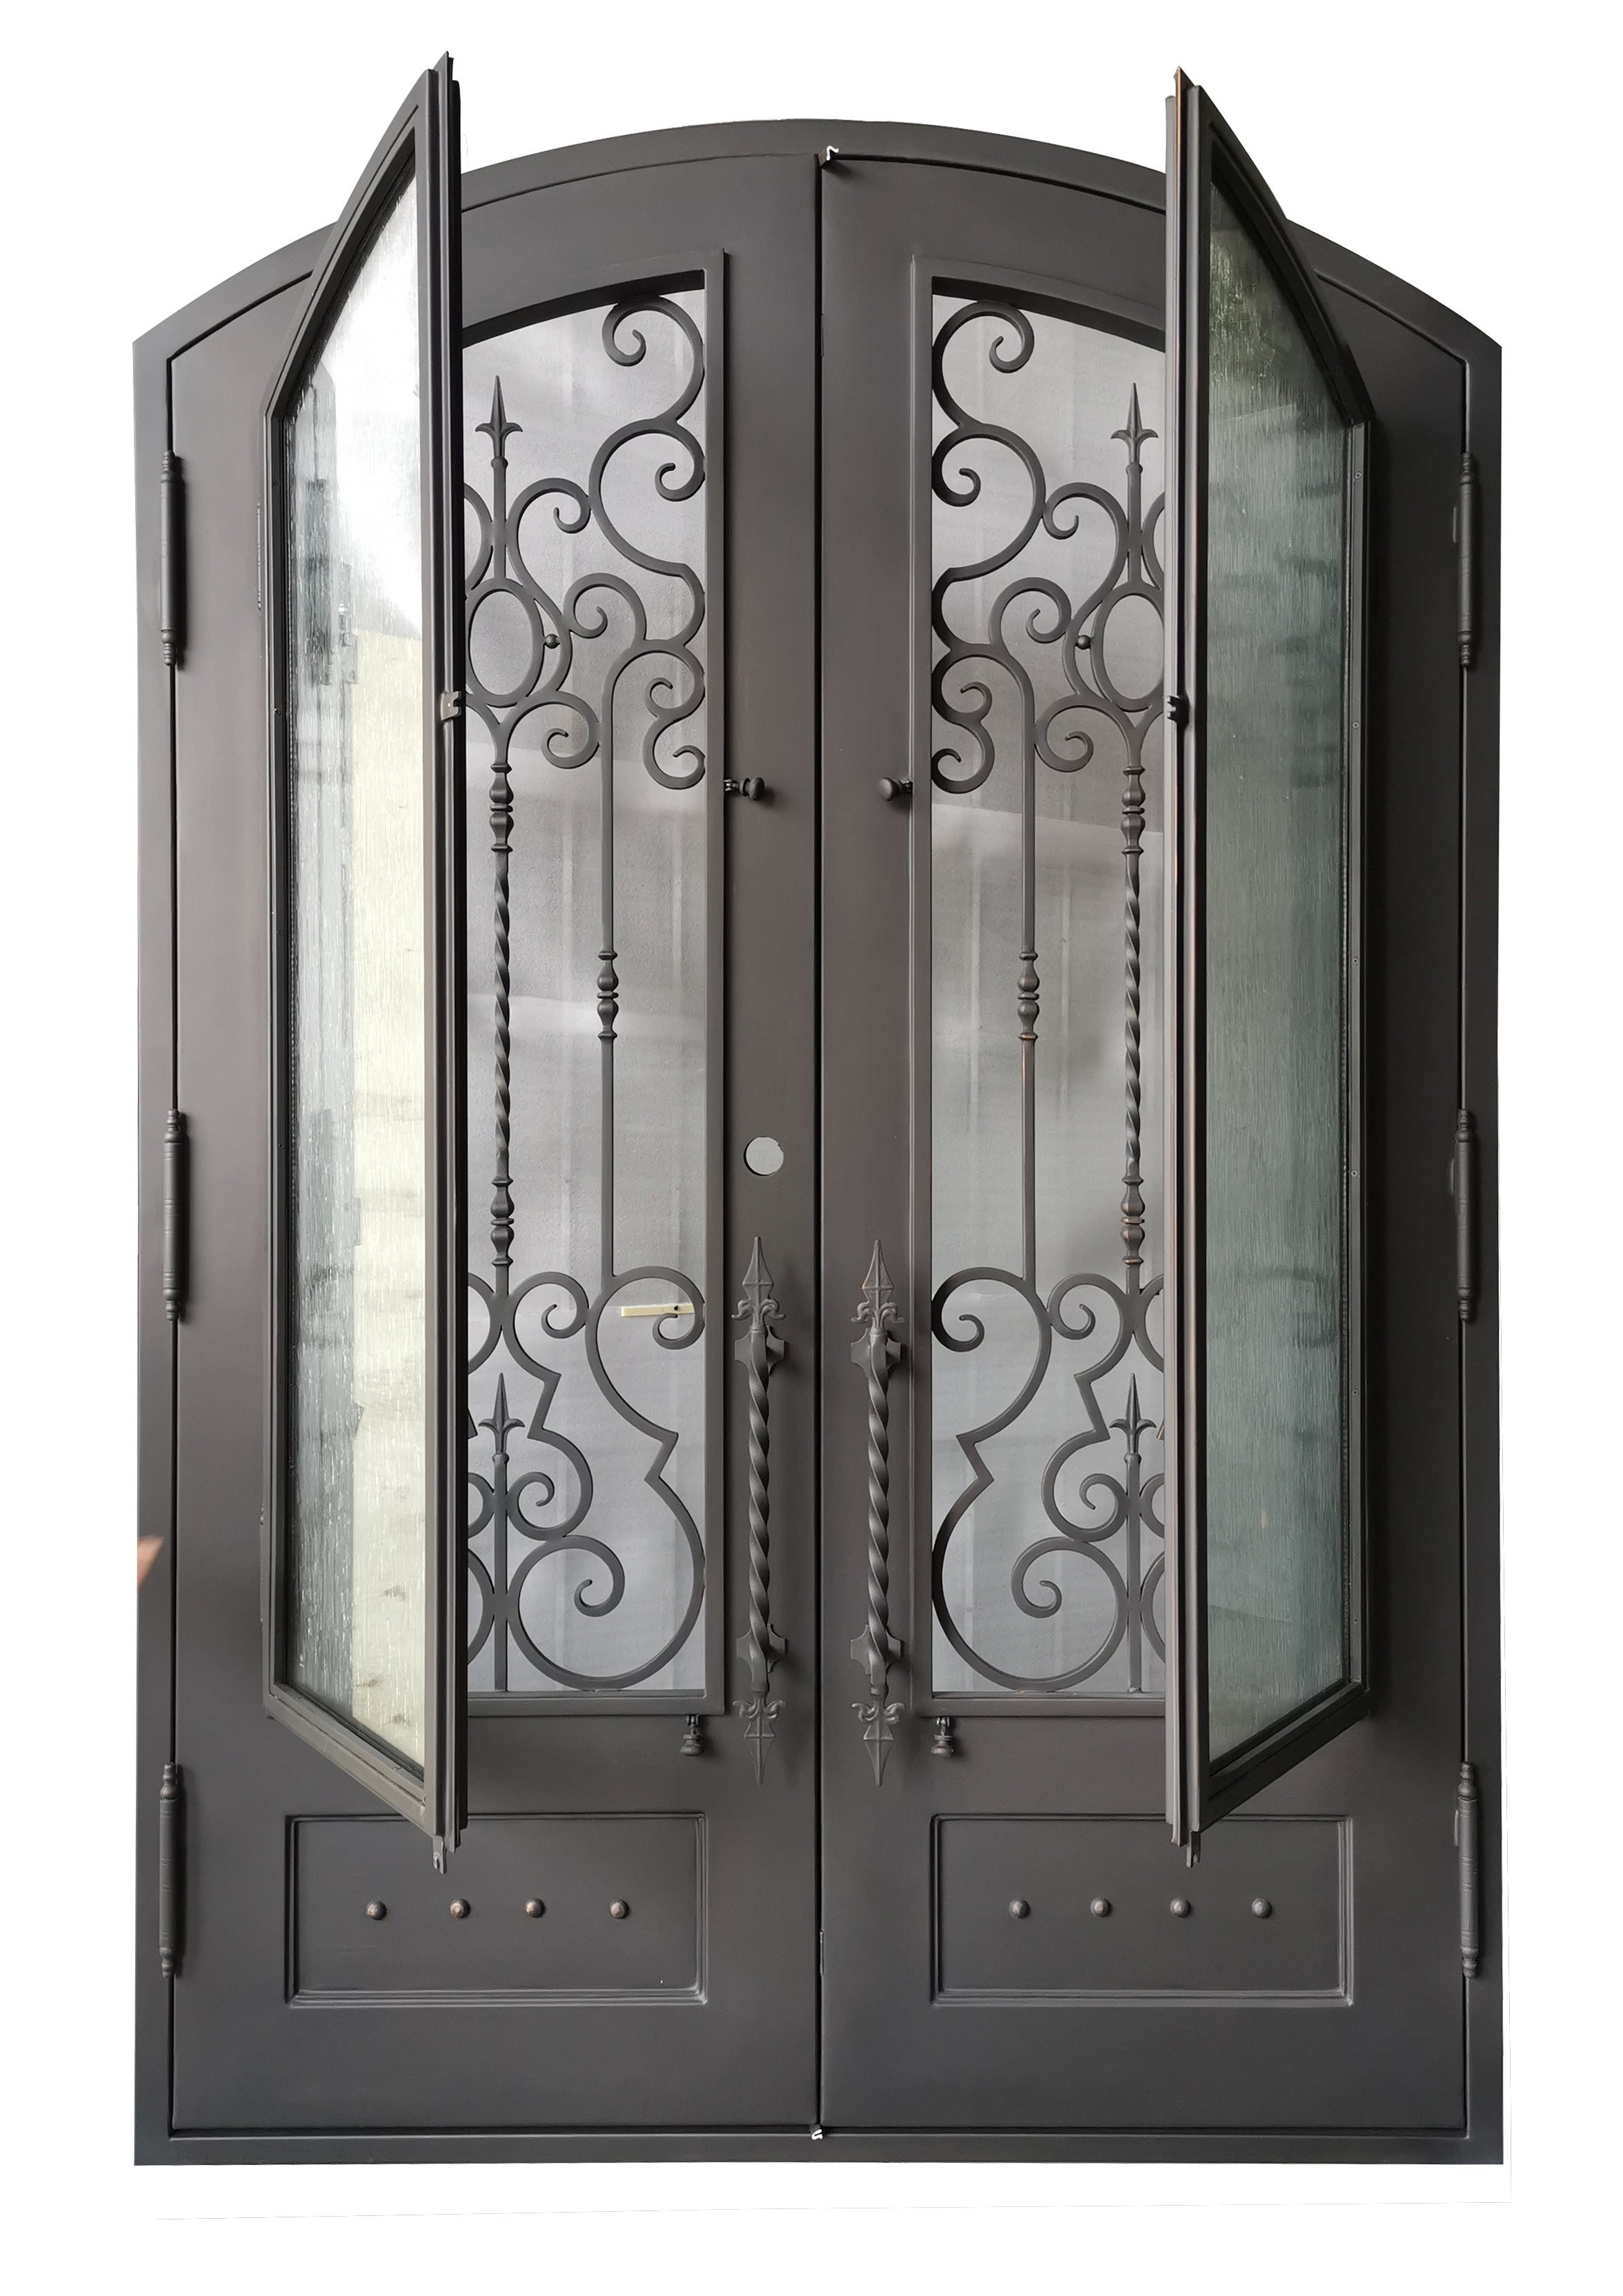 Addison Model Double Front Entry Iron Door With Tempered Rain Glass Dark Bronze Finish - AAWAIZ IMPORTS